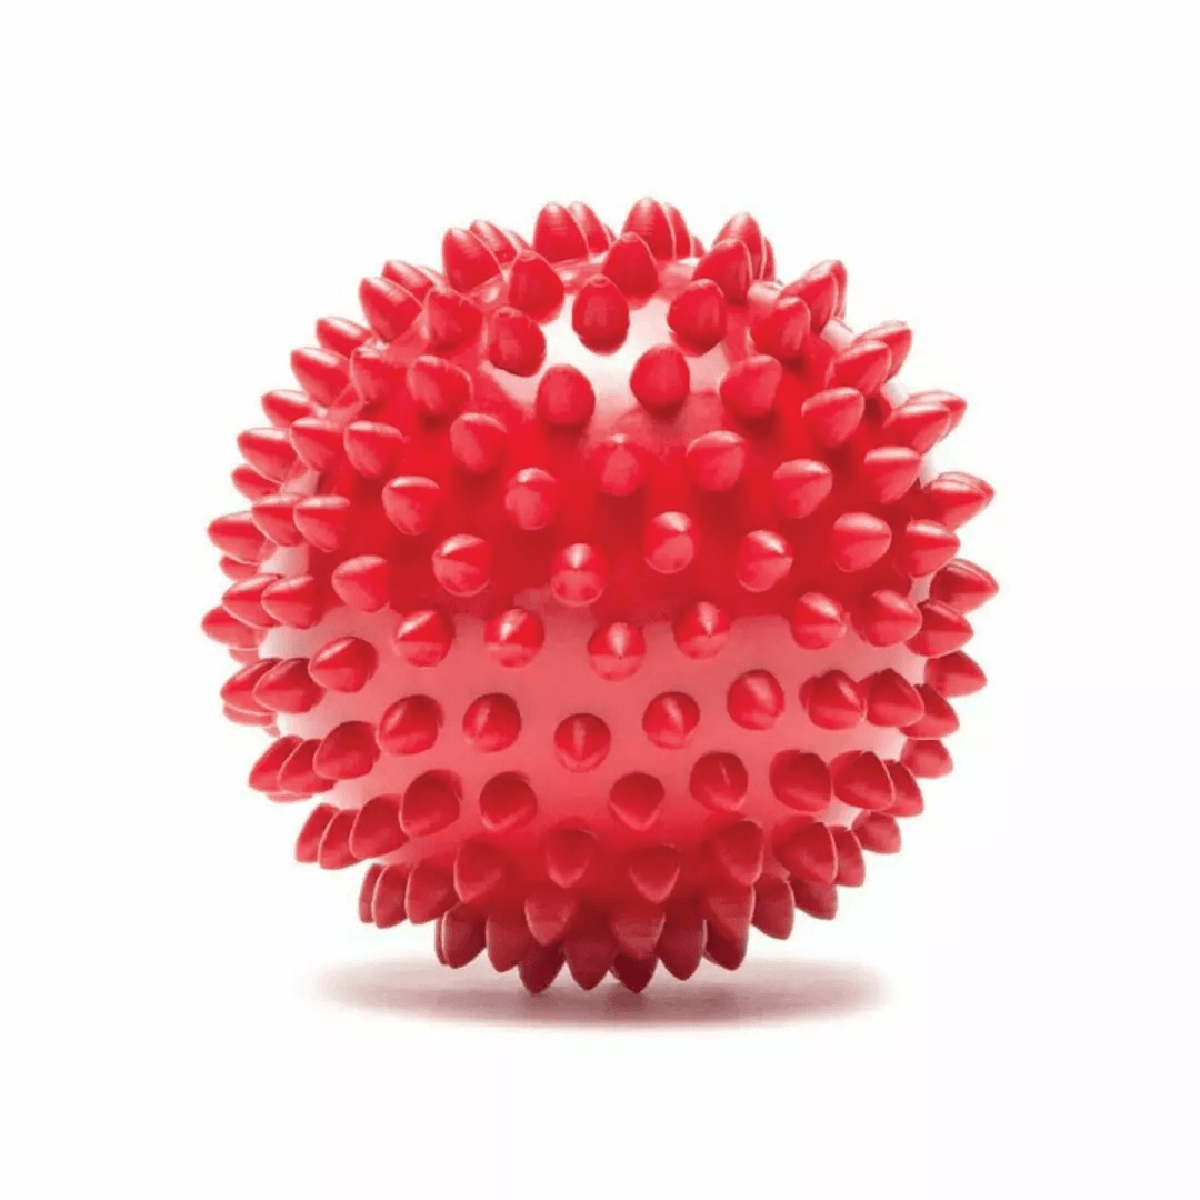 Pro-Tec Spiky Massage Ball, , large image number null